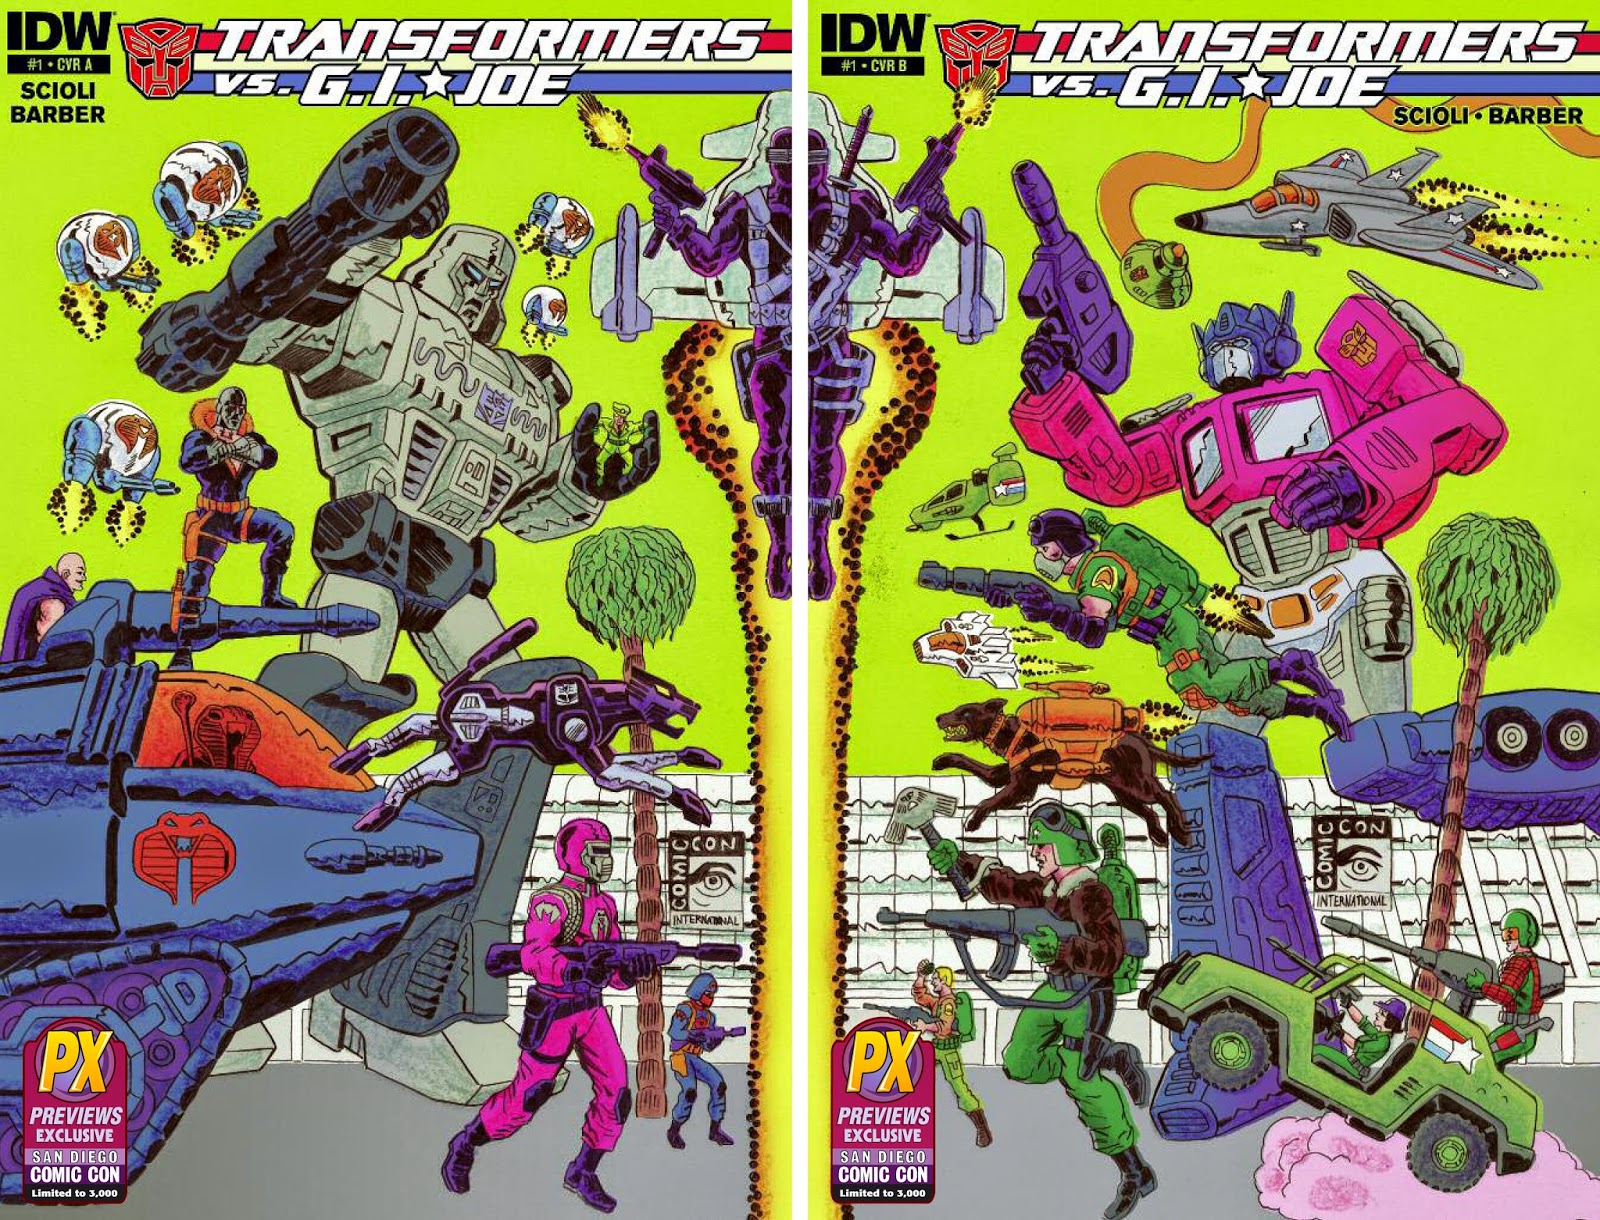 San Diego Comic-Con 2014 Exclusive Transformers vs. G.I. Joe #1 Variant Covers A and B by Tom Scioli